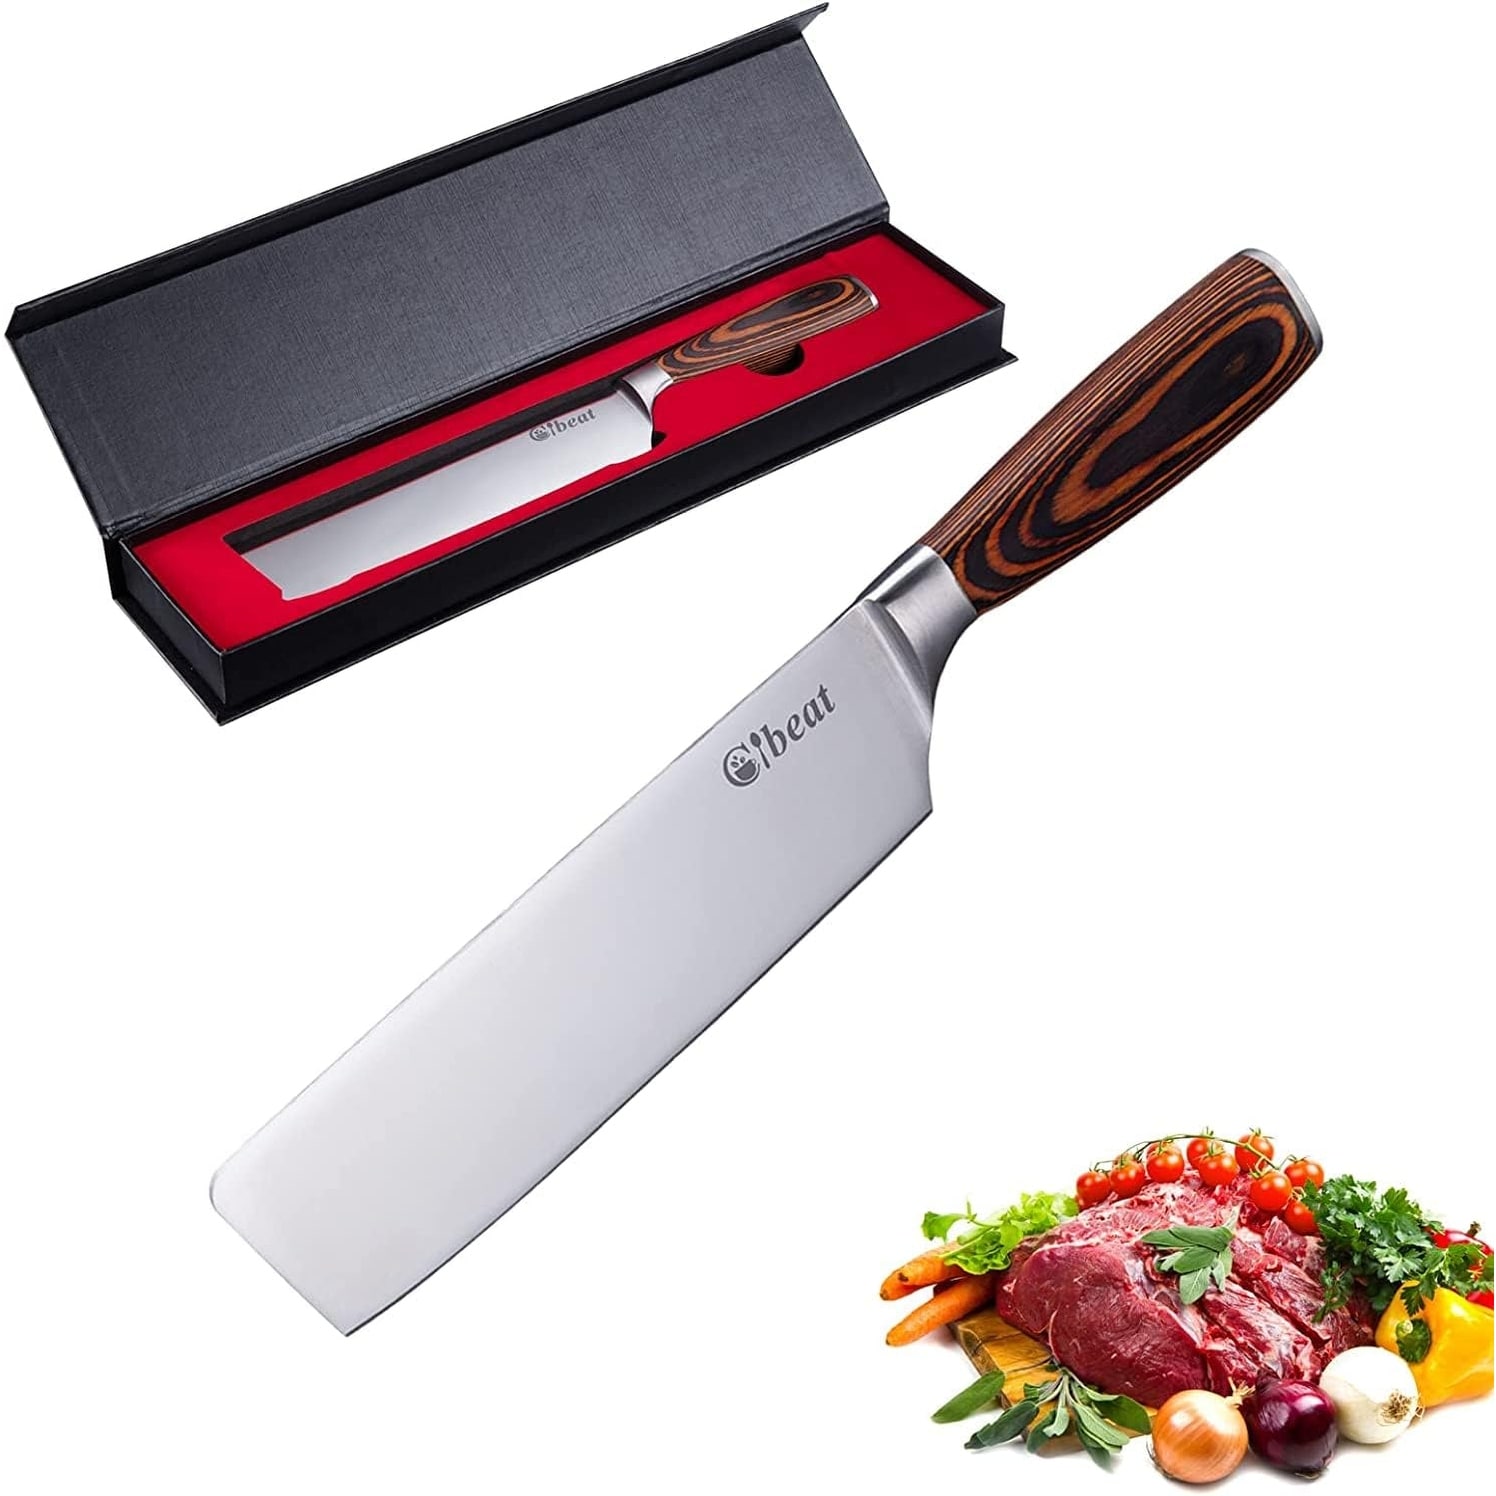  TUO Cleaver Knife, 7 inch Chinese Cleaver Vegetable Meat  Cleaver Knife, High Carbon Stainless Steel Chopping Knife with Ergonomic:  Home & Kitchen